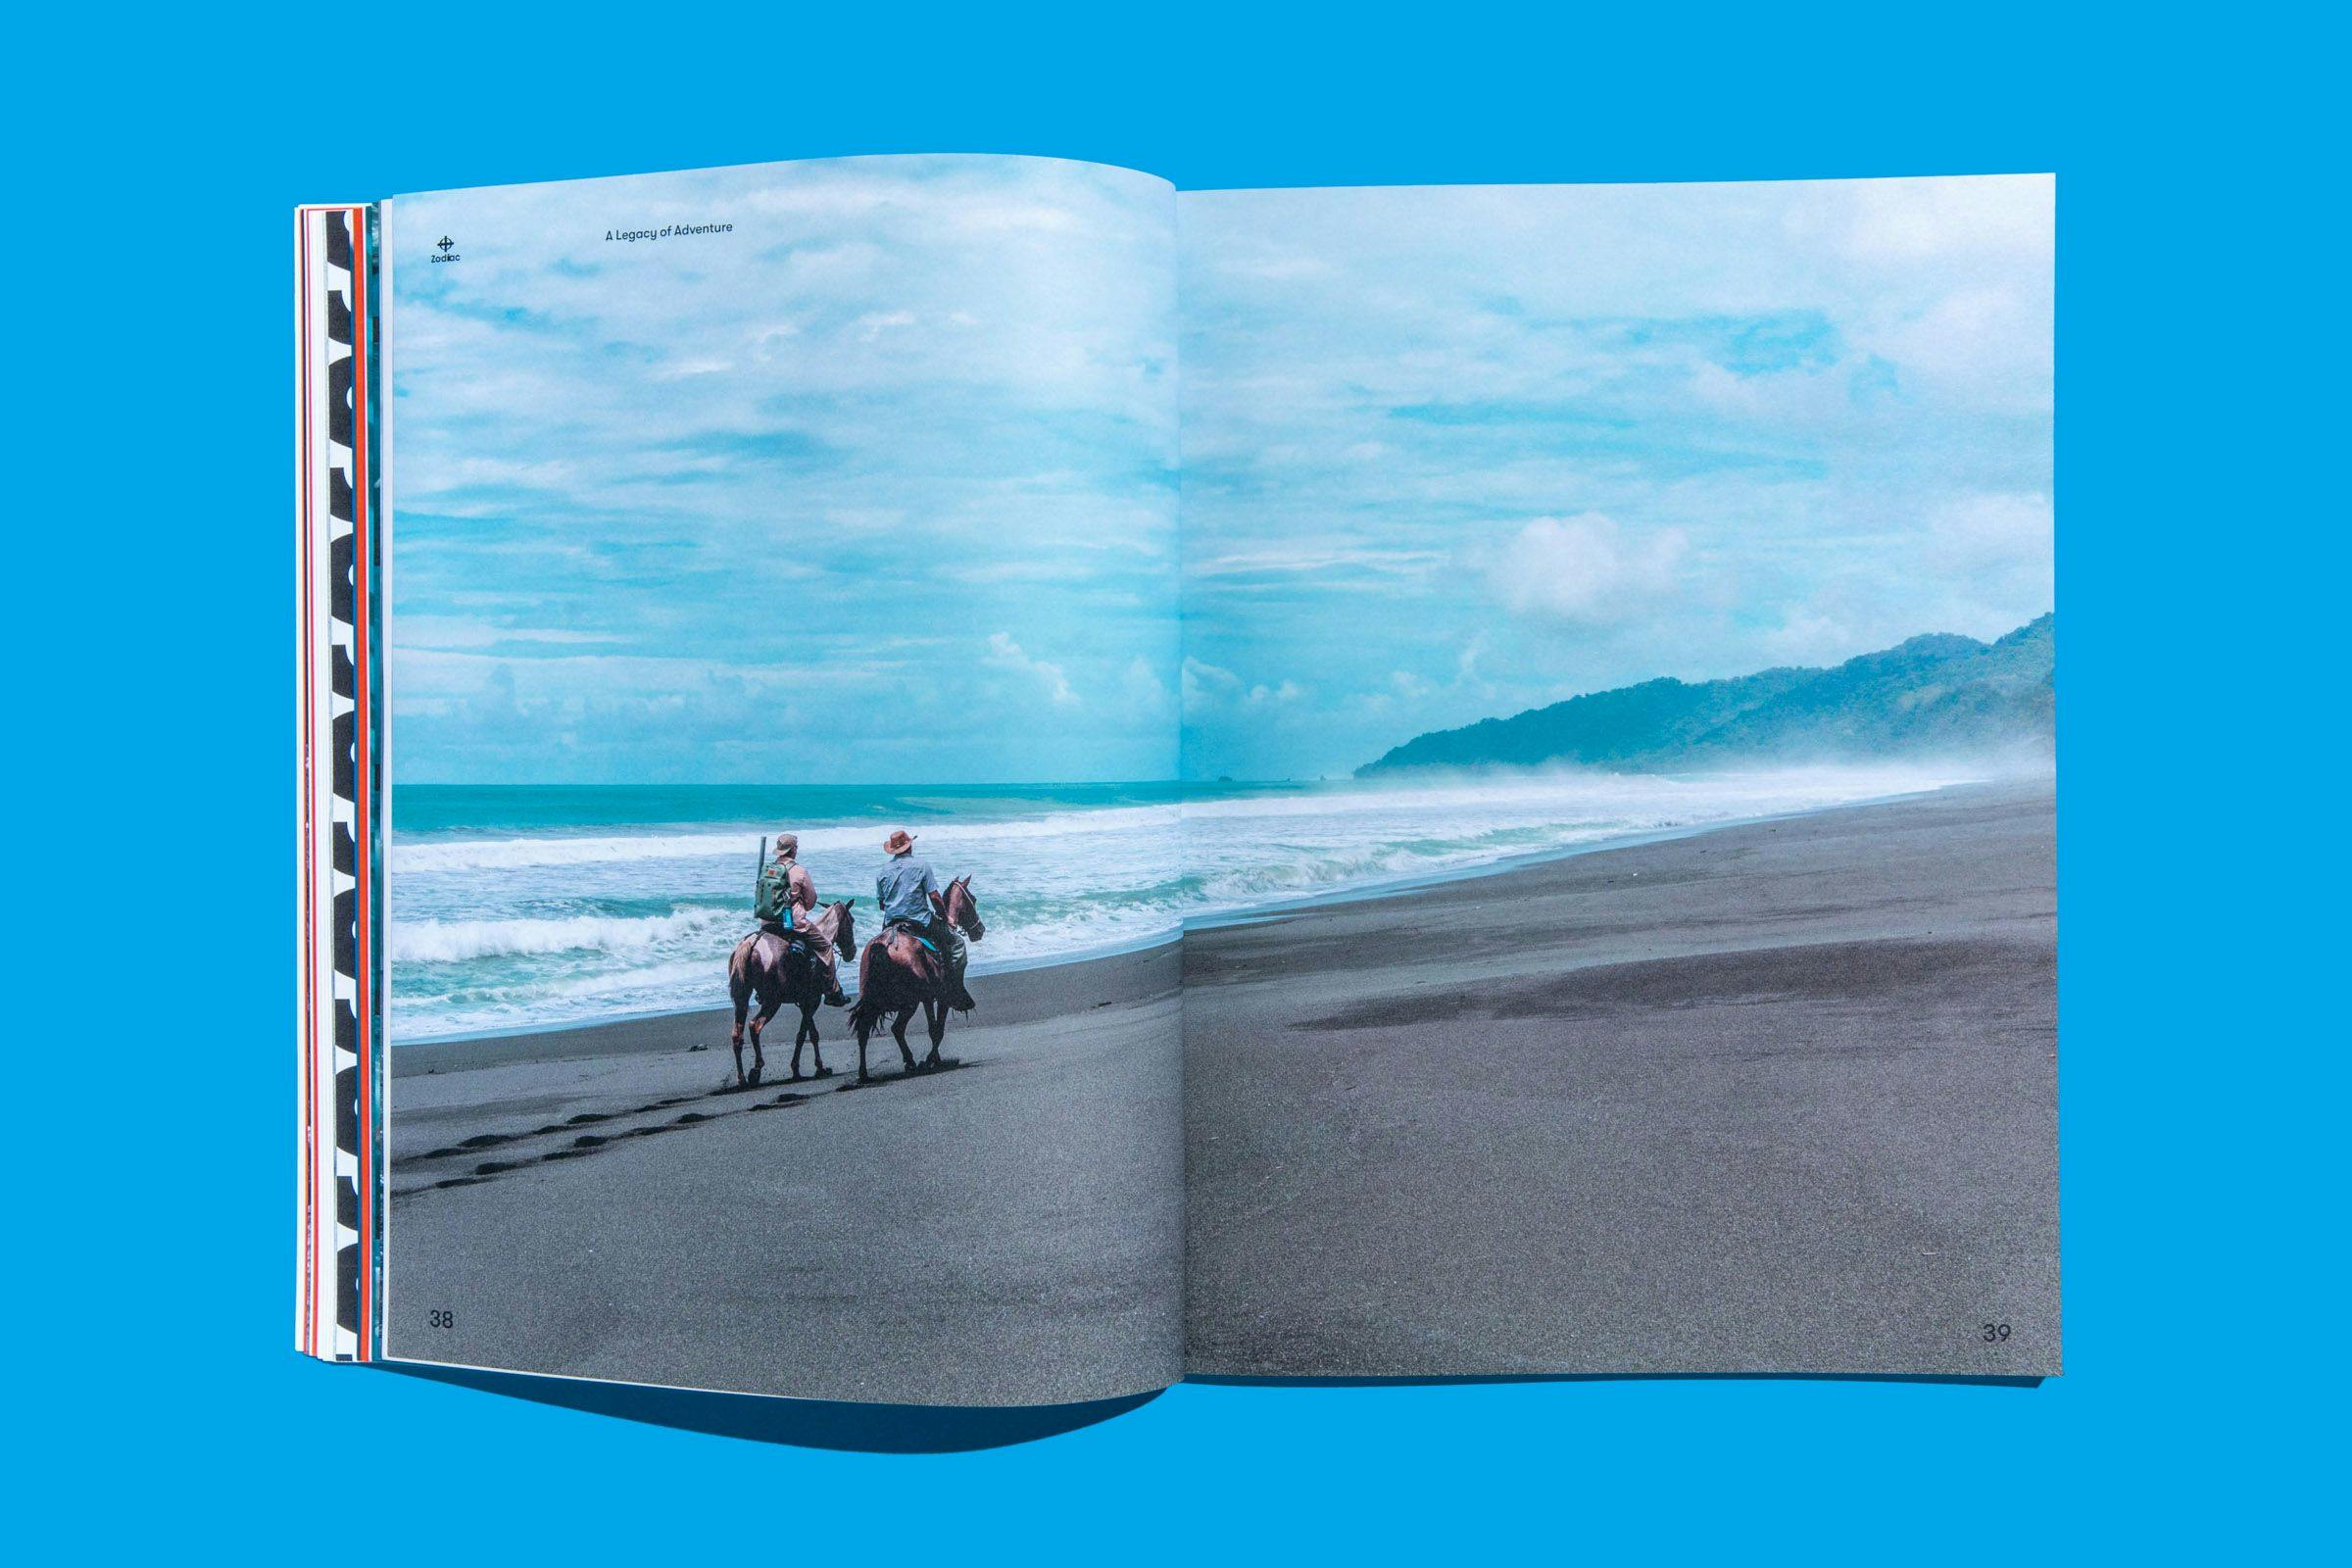 A two-page spread showing to individuals horseback riding on a beach